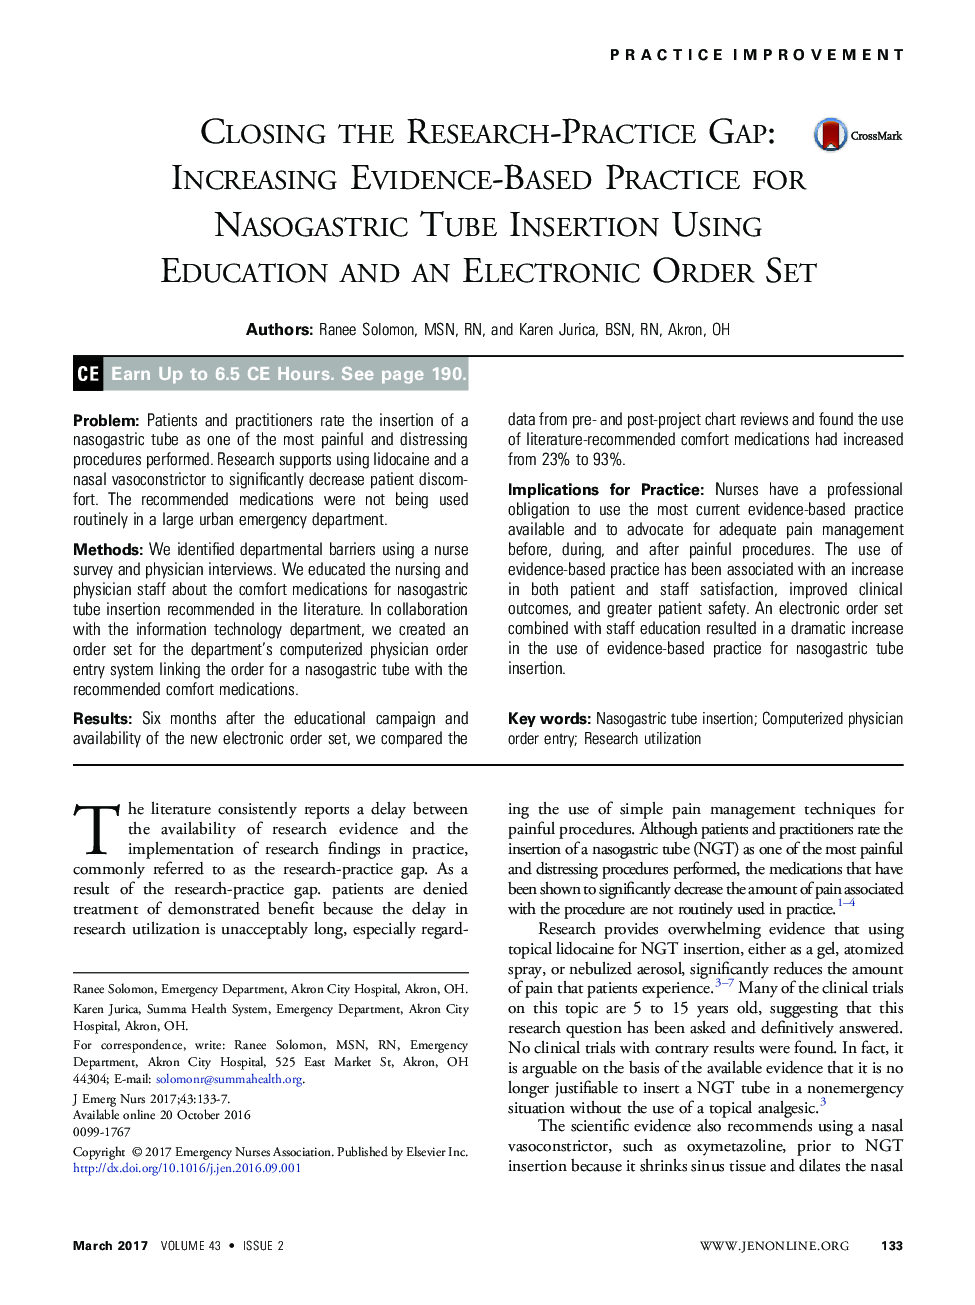 Closing the Research-Practice Gap: Increasing Evidence-Based Practice for Nasogastric Tube Insertion Using Education and an Electronic Order Set